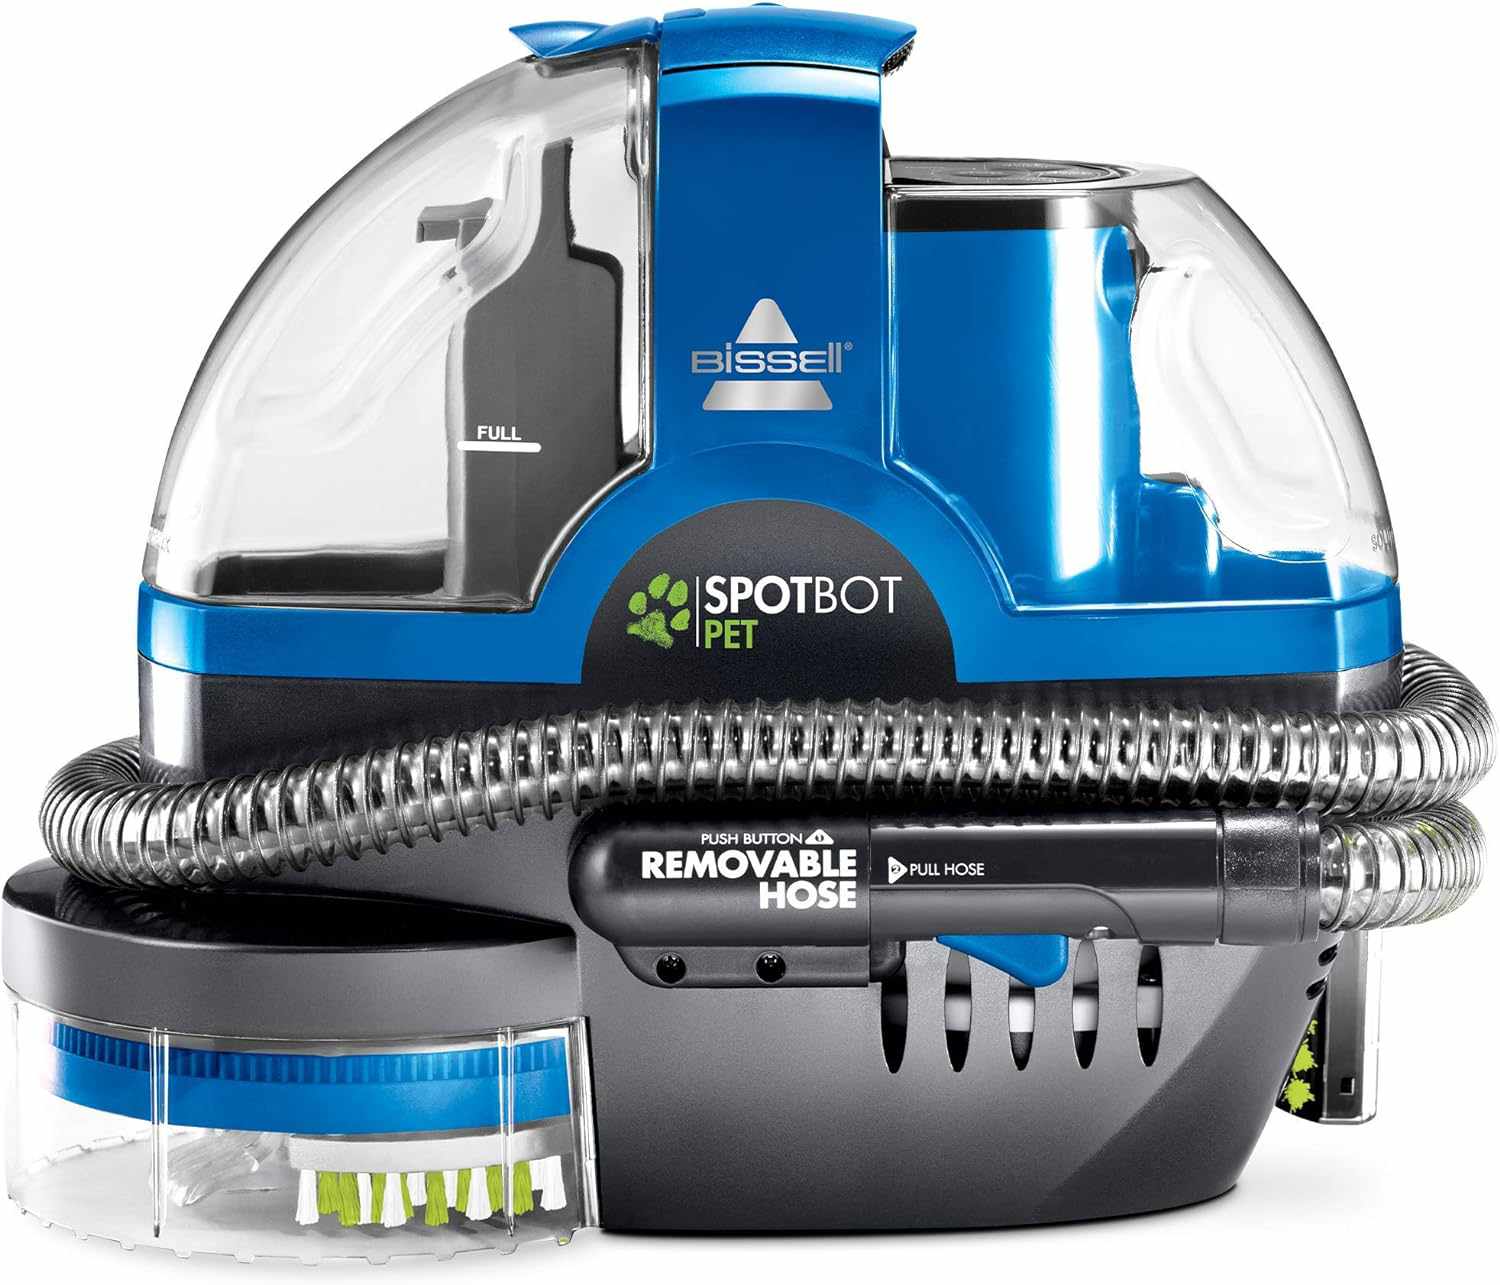 Bissell SpotBot Pet handsfree Spot and Stain Portable Deep Cleaner